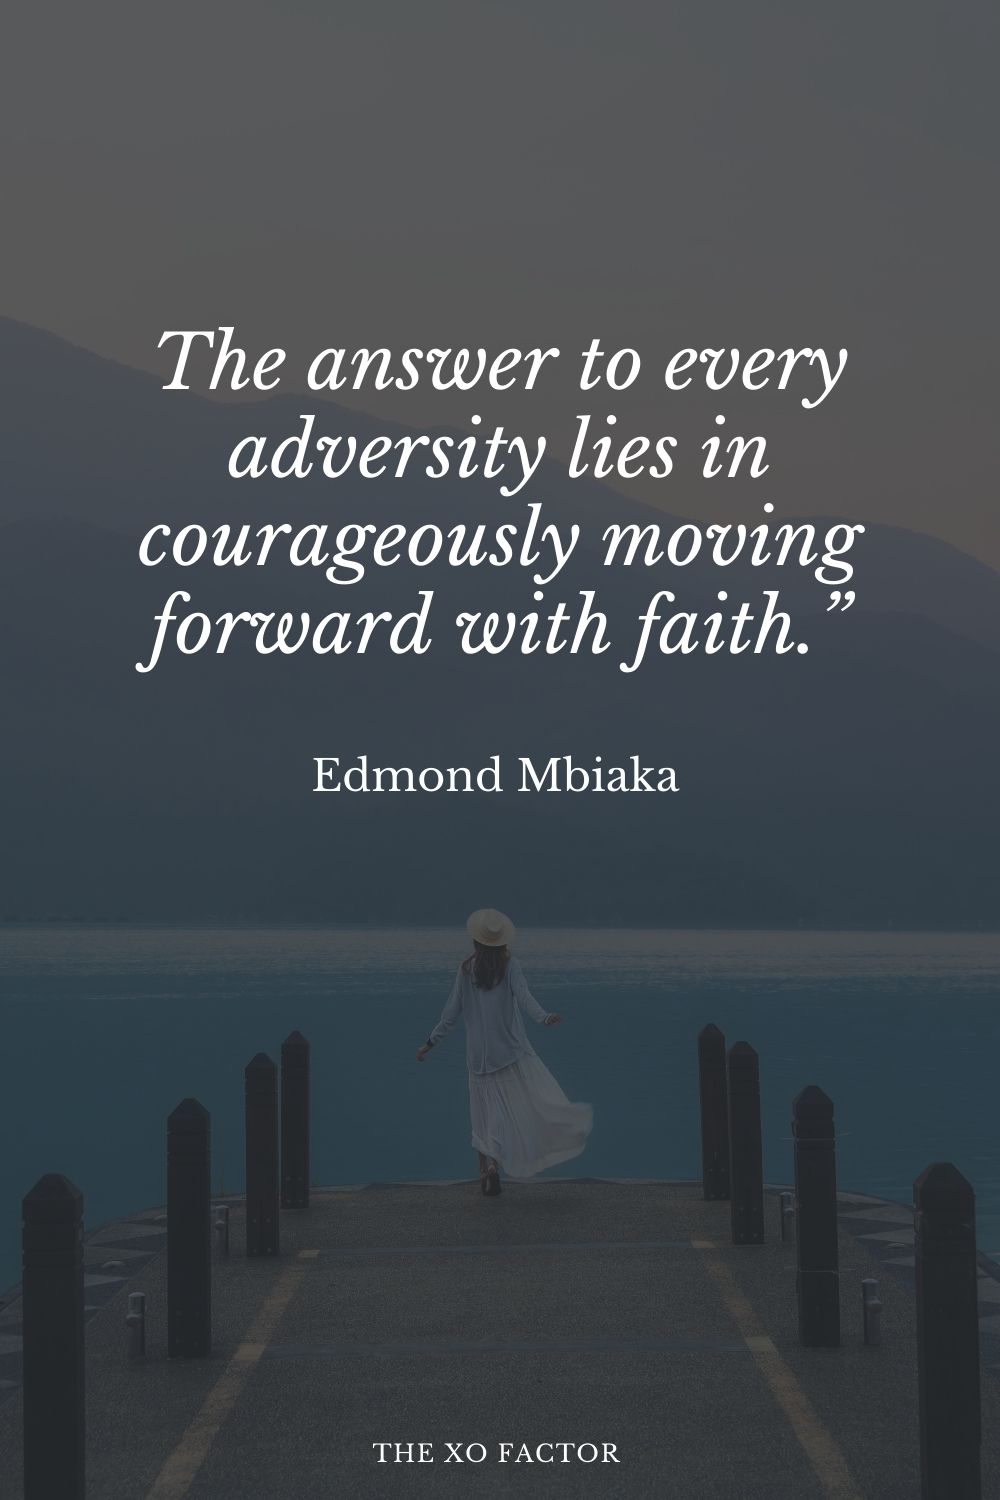 The answer to every adversity lies in courageously moving forward with faith.” Edmond Mbiaka